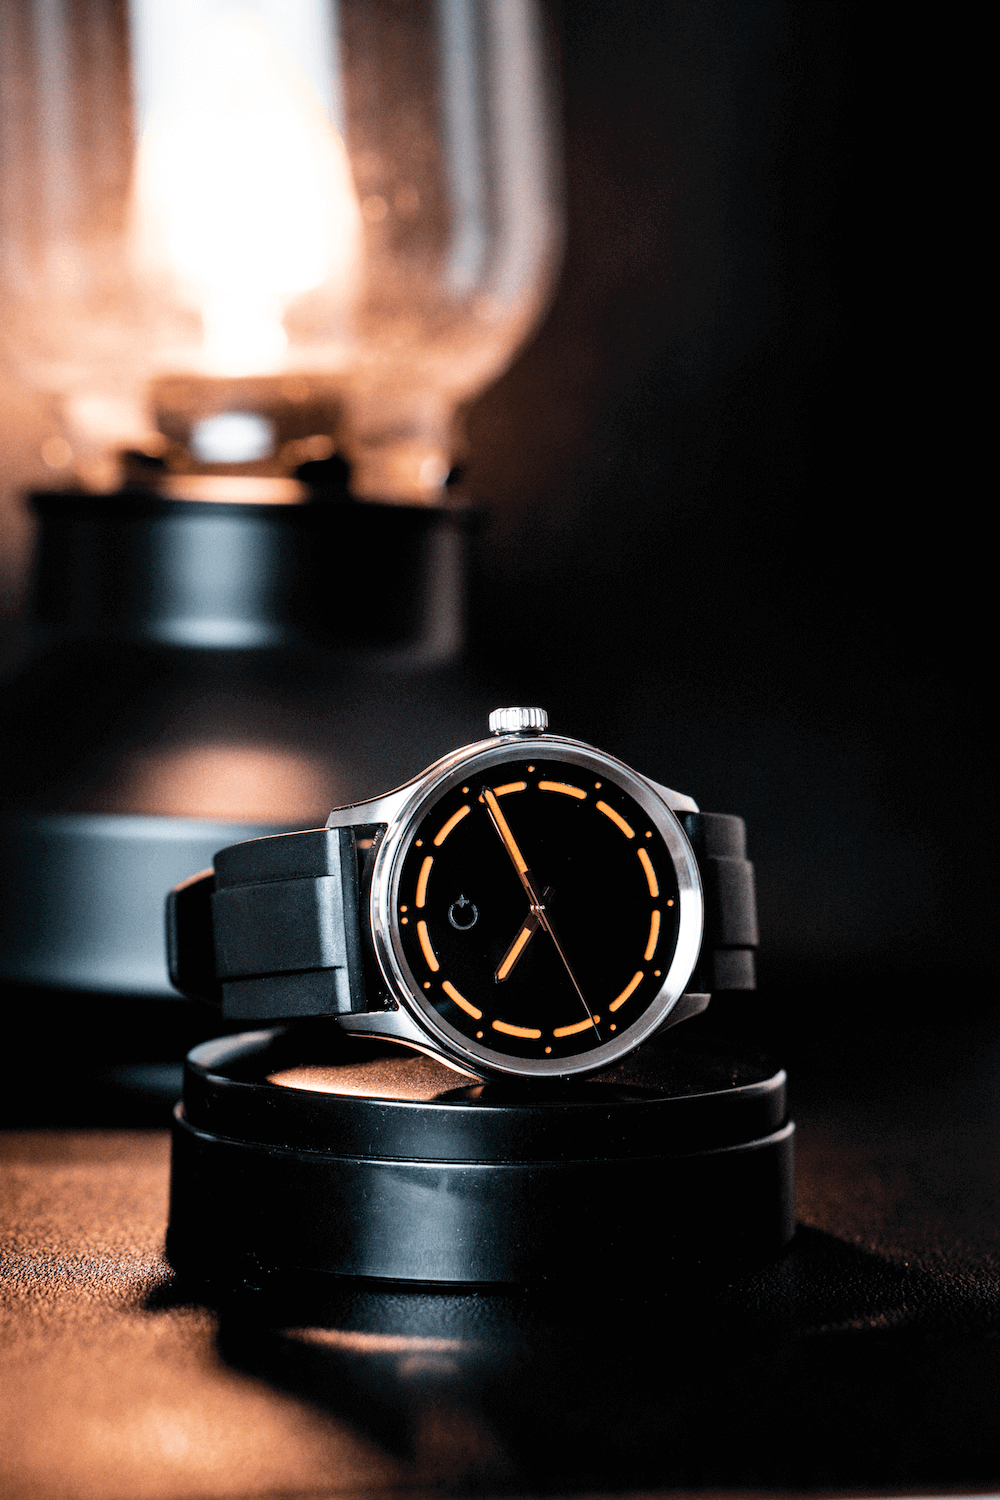 NanoBlack watch with orange dial, which glows green in the dark. Super black watch from Chronotechna 2018